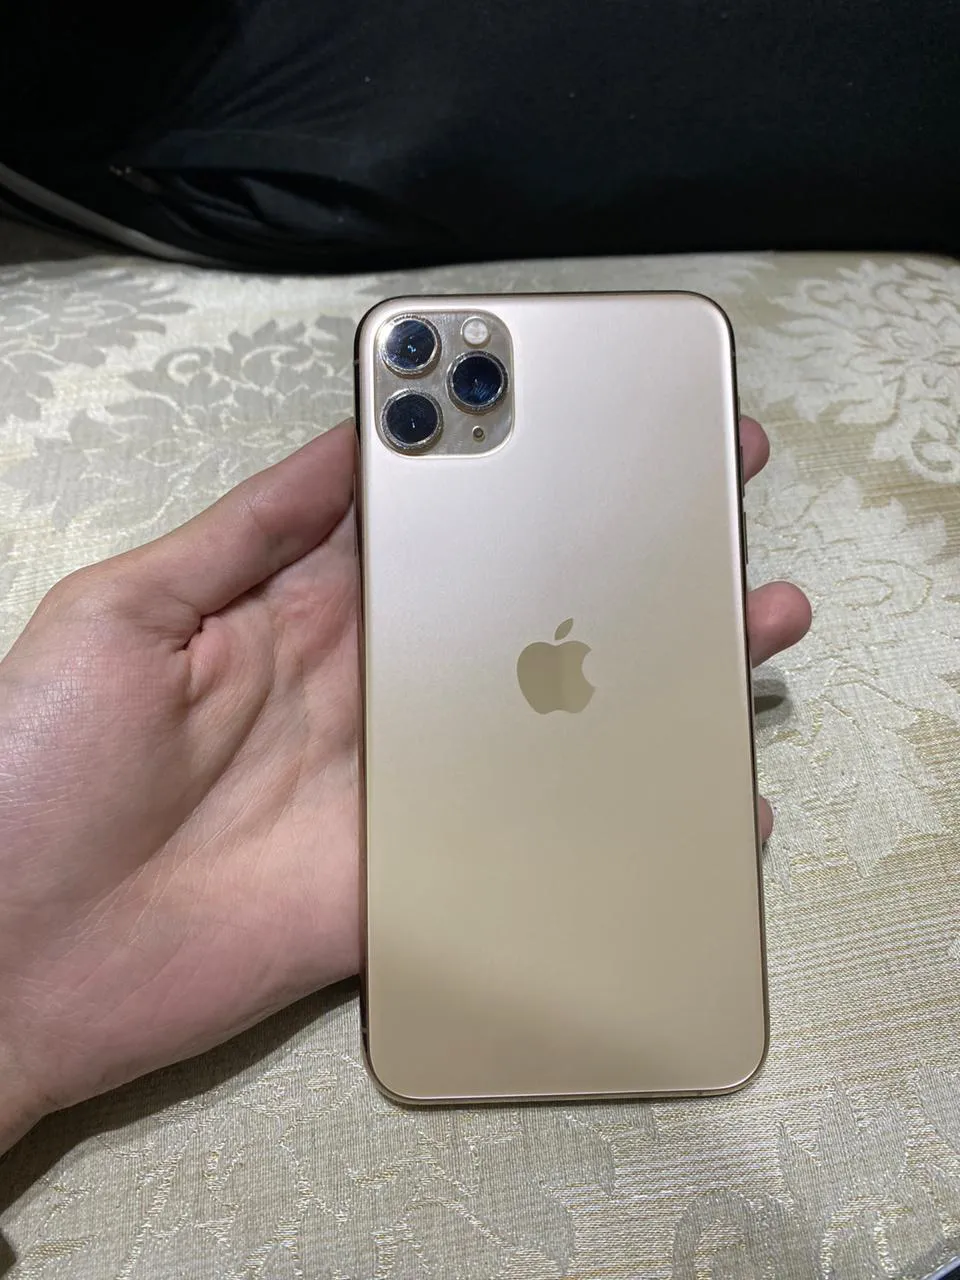 IPhone 11 pro max 64gb - Used Mobile Phone for sale in Punjab